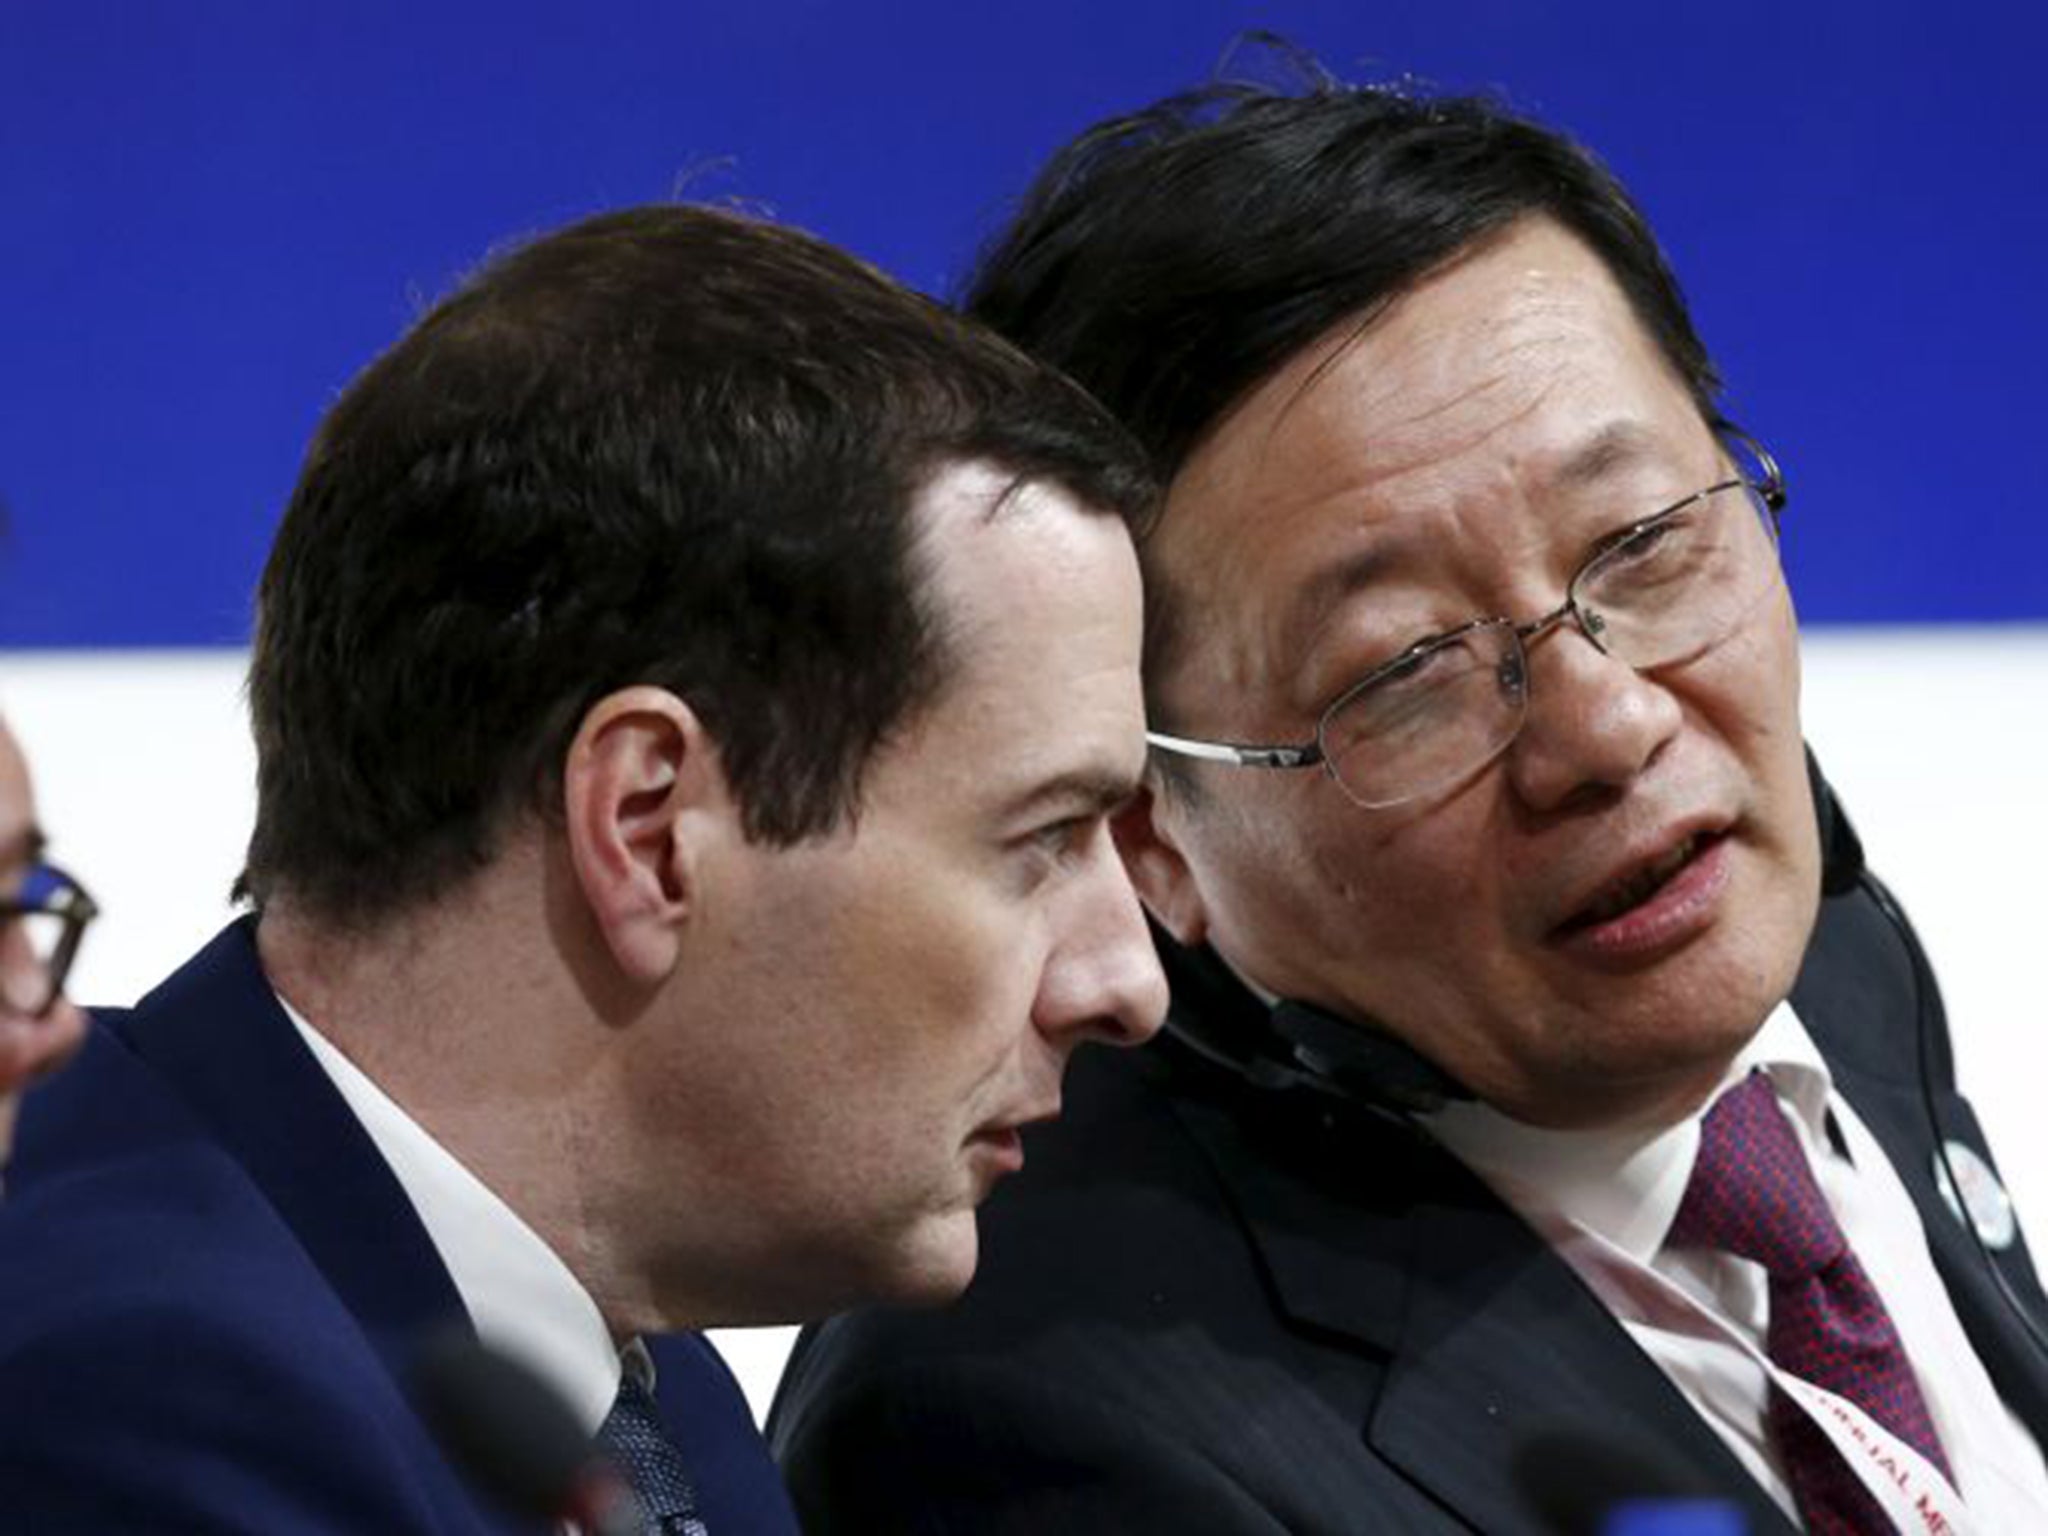 Chancellor of the Exchequer George Osborne meeting with China's Finance Minister Lou Jiwei at the 2015 IMF/World Bank Annual Meetings in Lima, Peru earlier this month